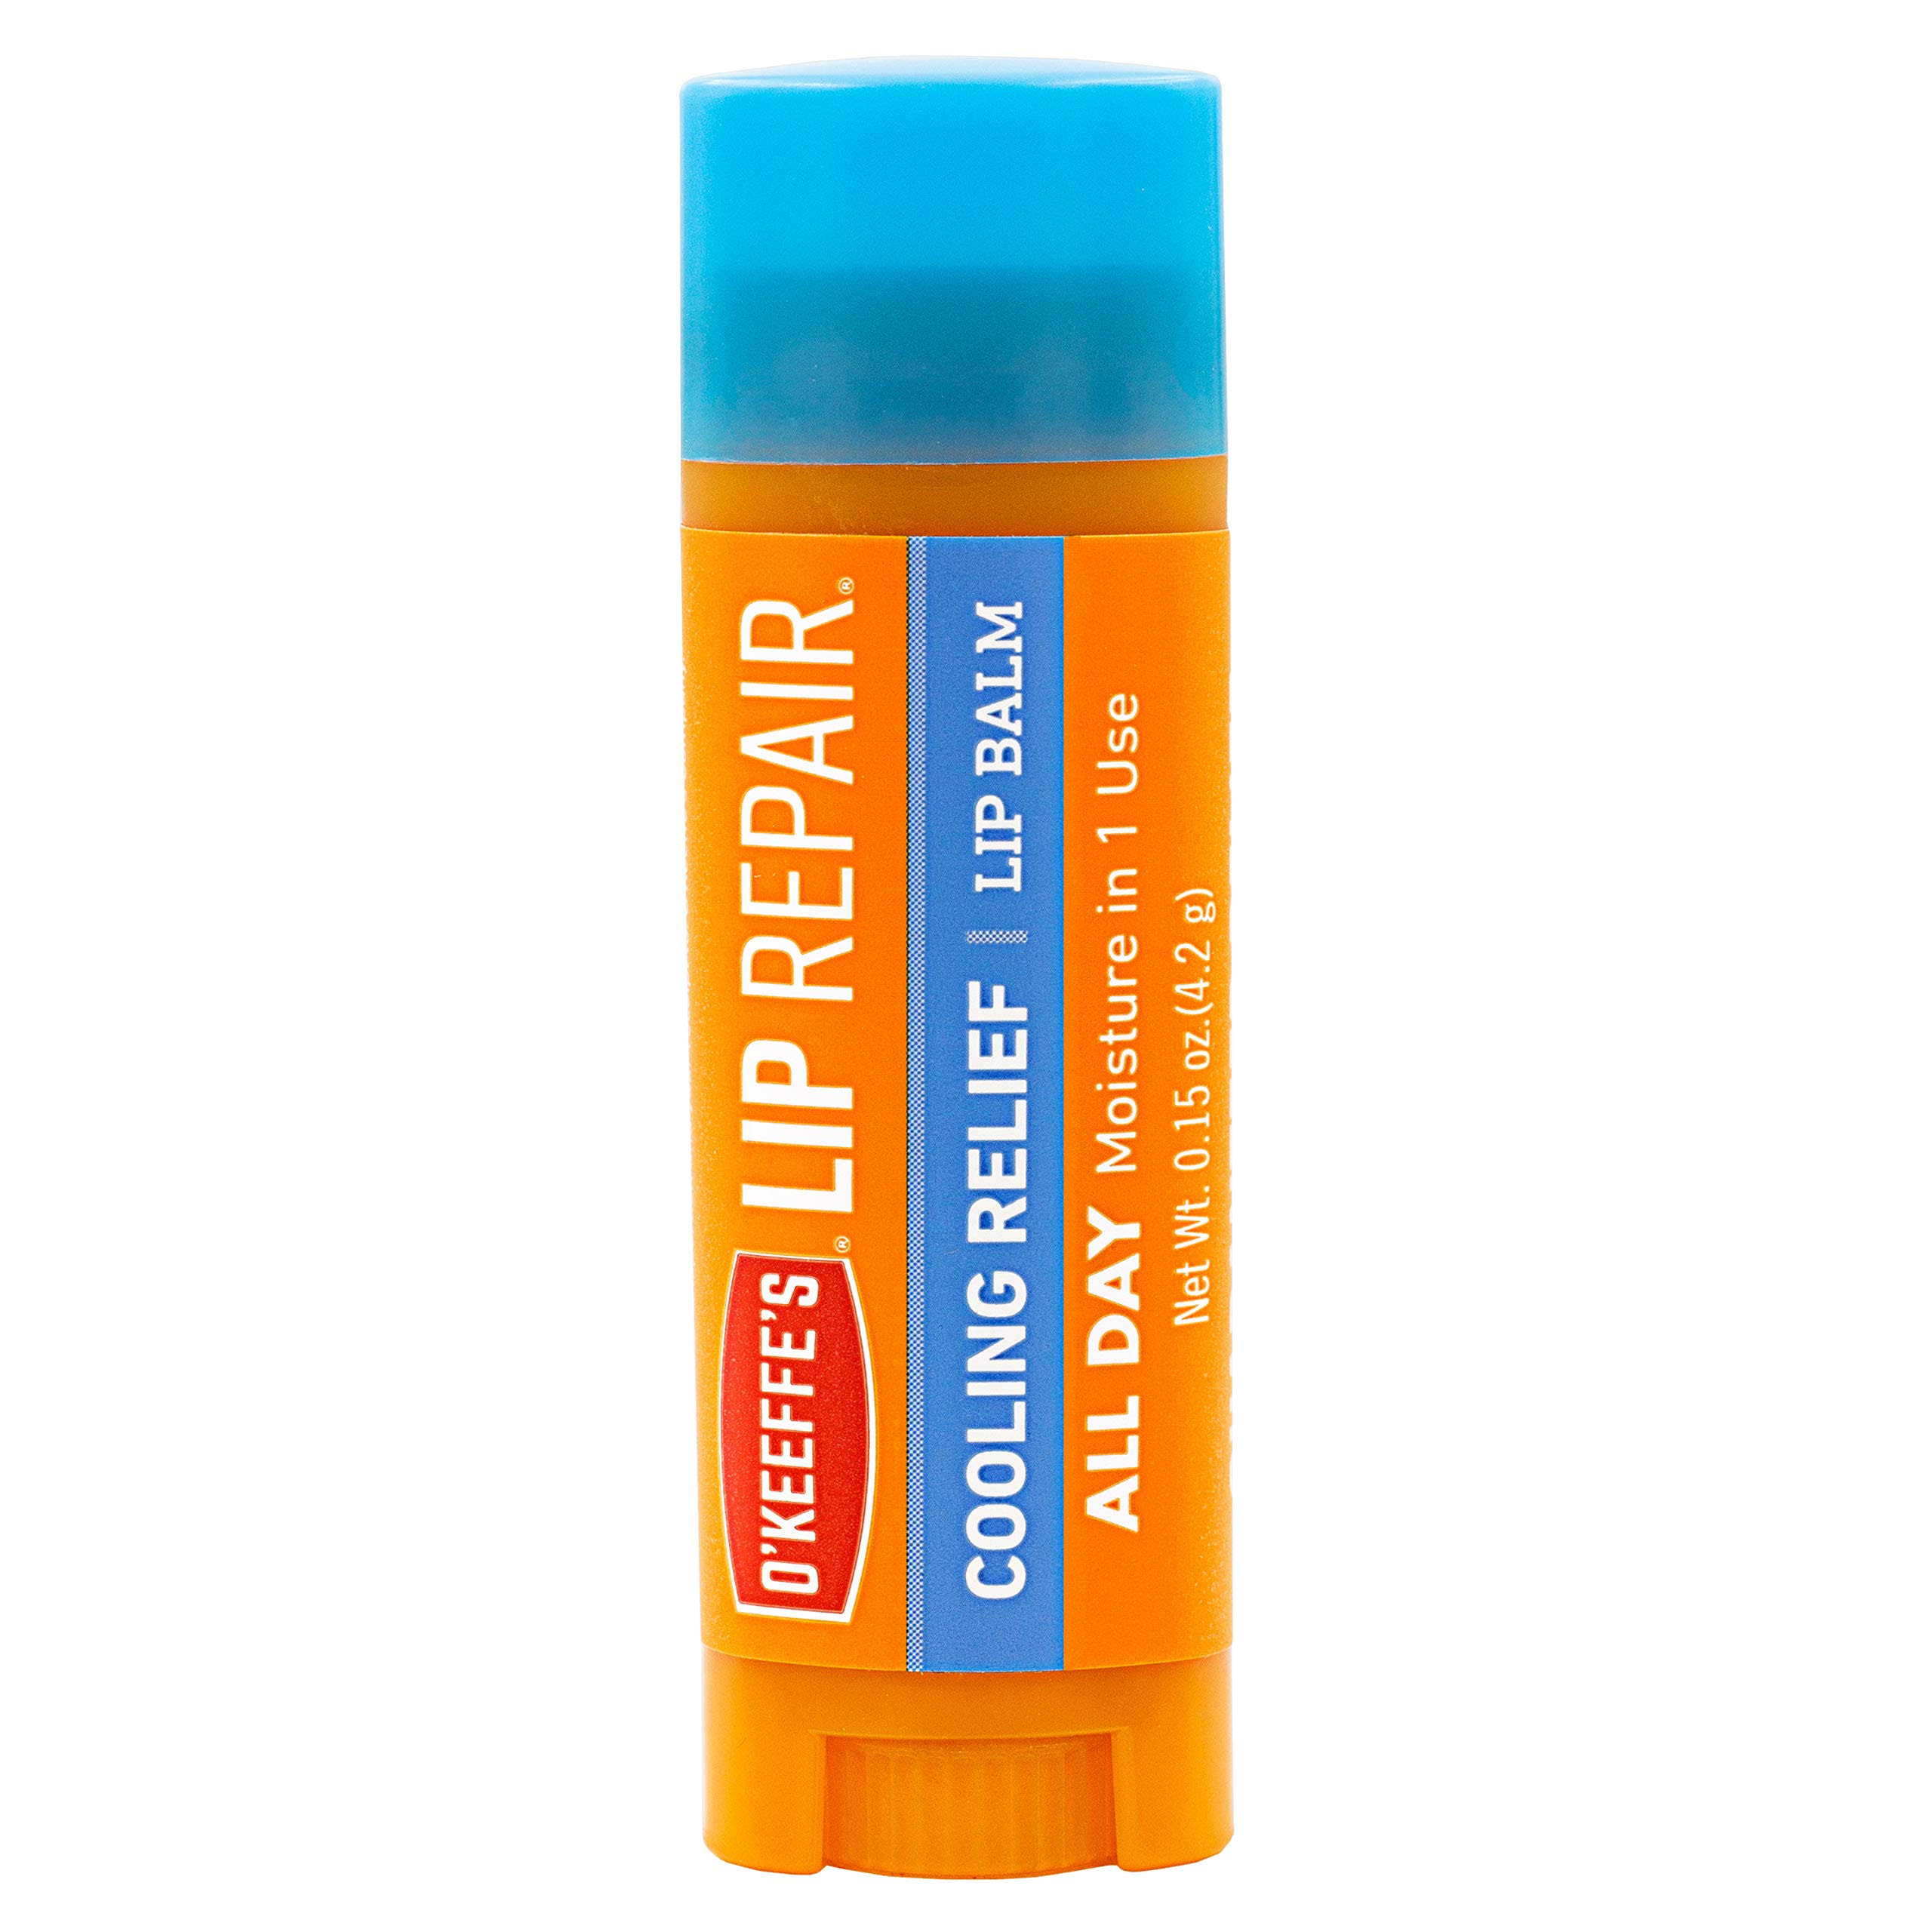 O'Keeffe's Lip Repair Stick - Cooling Relief